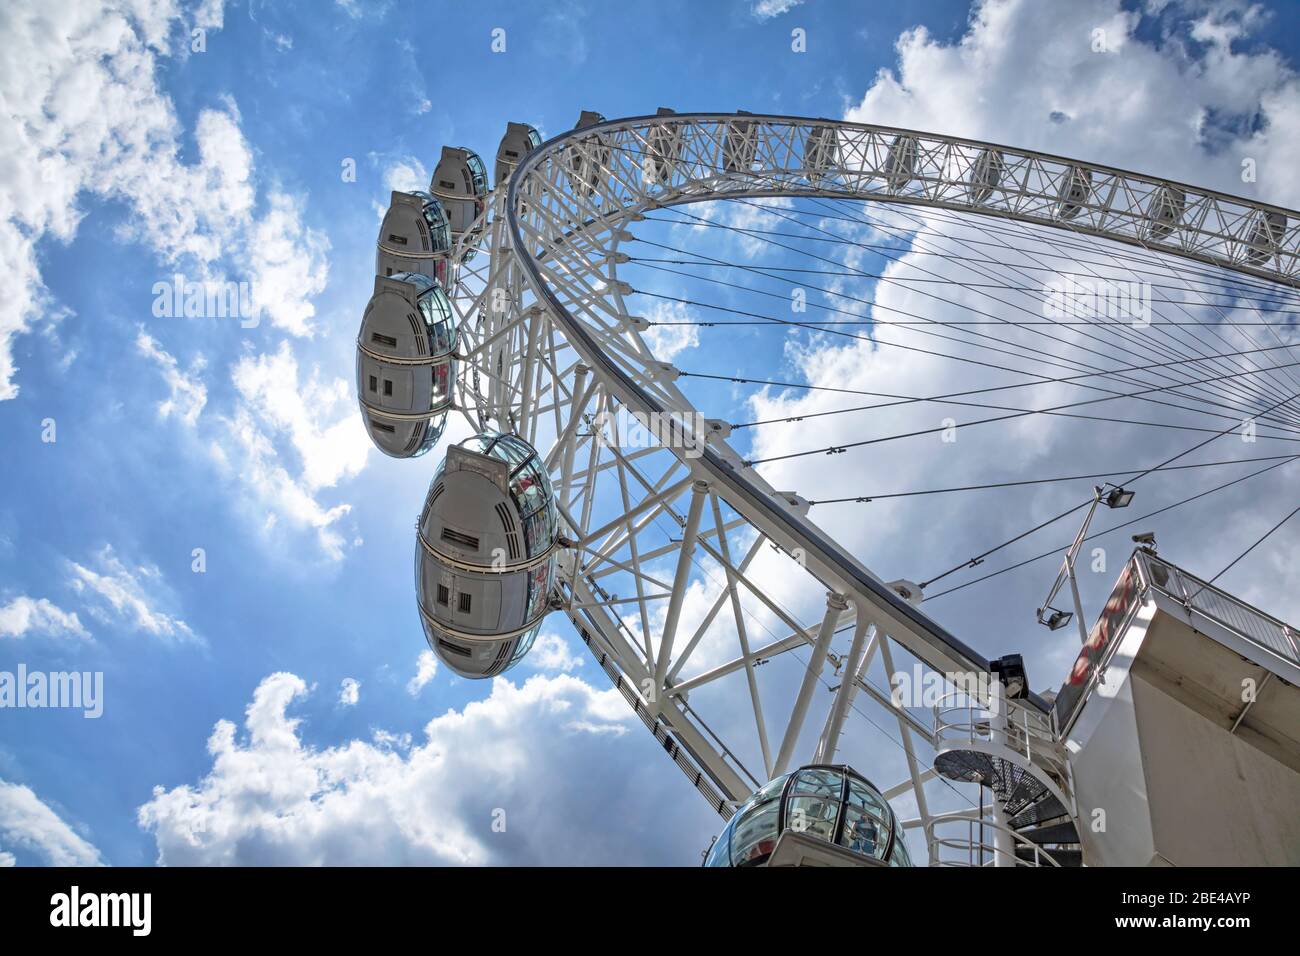 View from directly below the cables and pods of the London Eye with a blue sky and clouds in the background; London, England Stock Photo